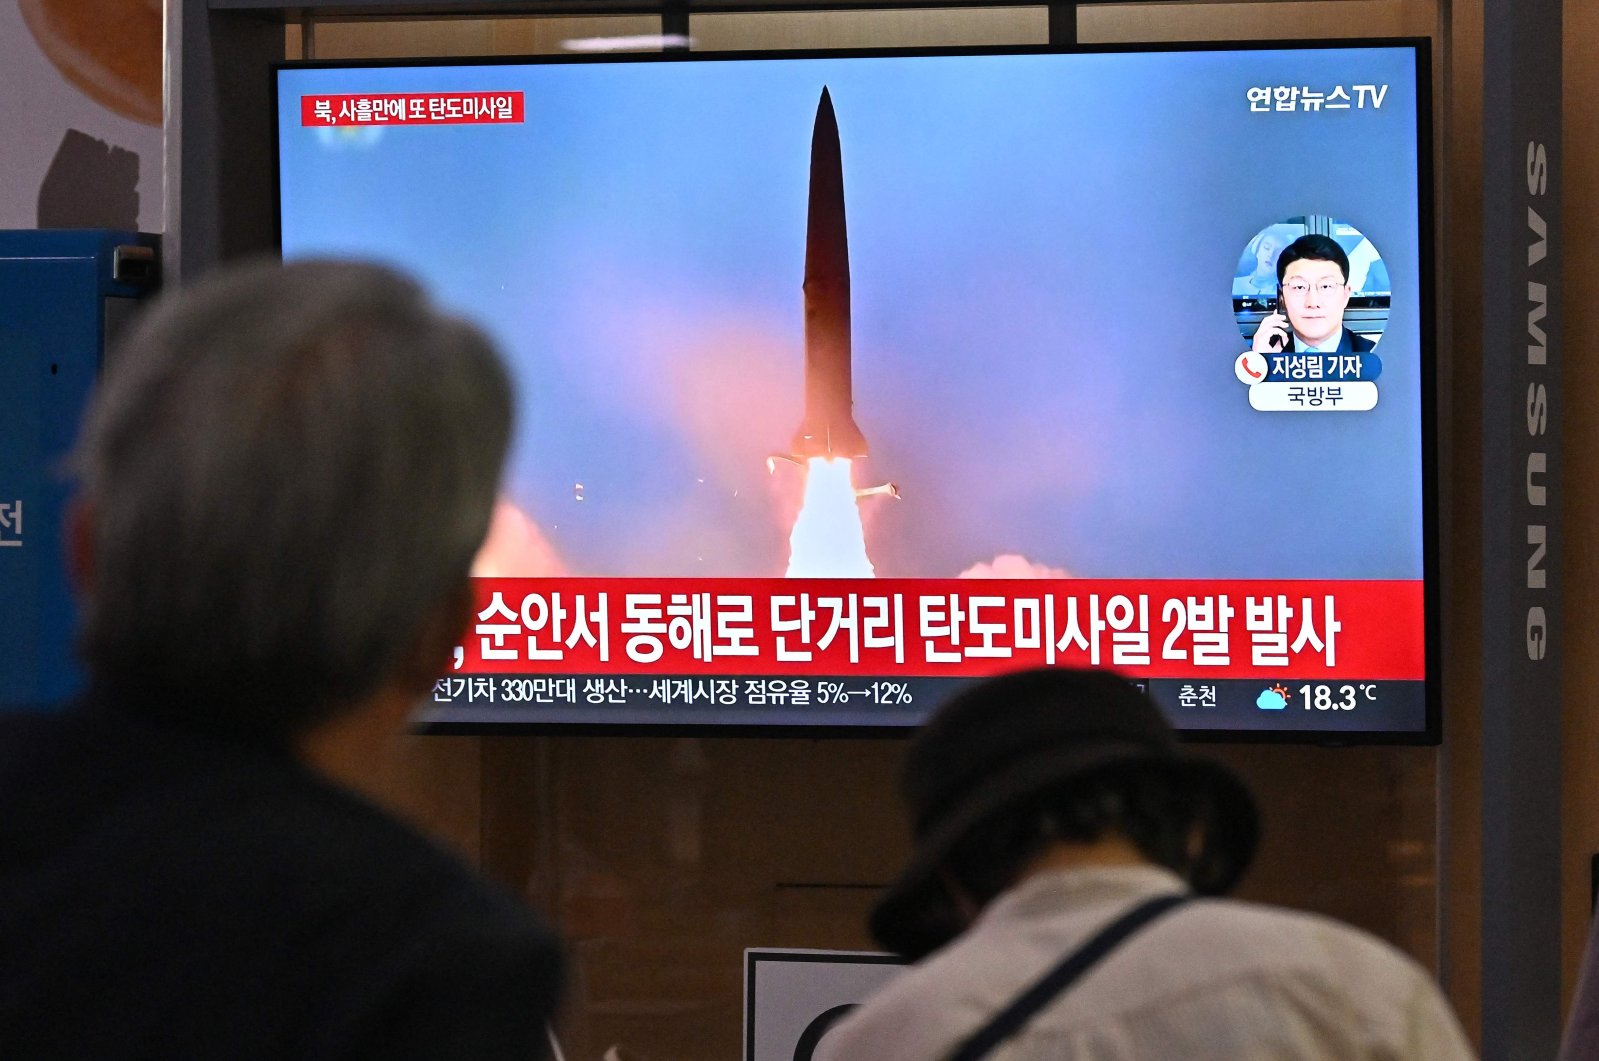 People watch a television screen showing a news broadcast with file footage of a North Korean missile test, Seoul, South Korea, Sept. 28, 2022. (AFP Photo)